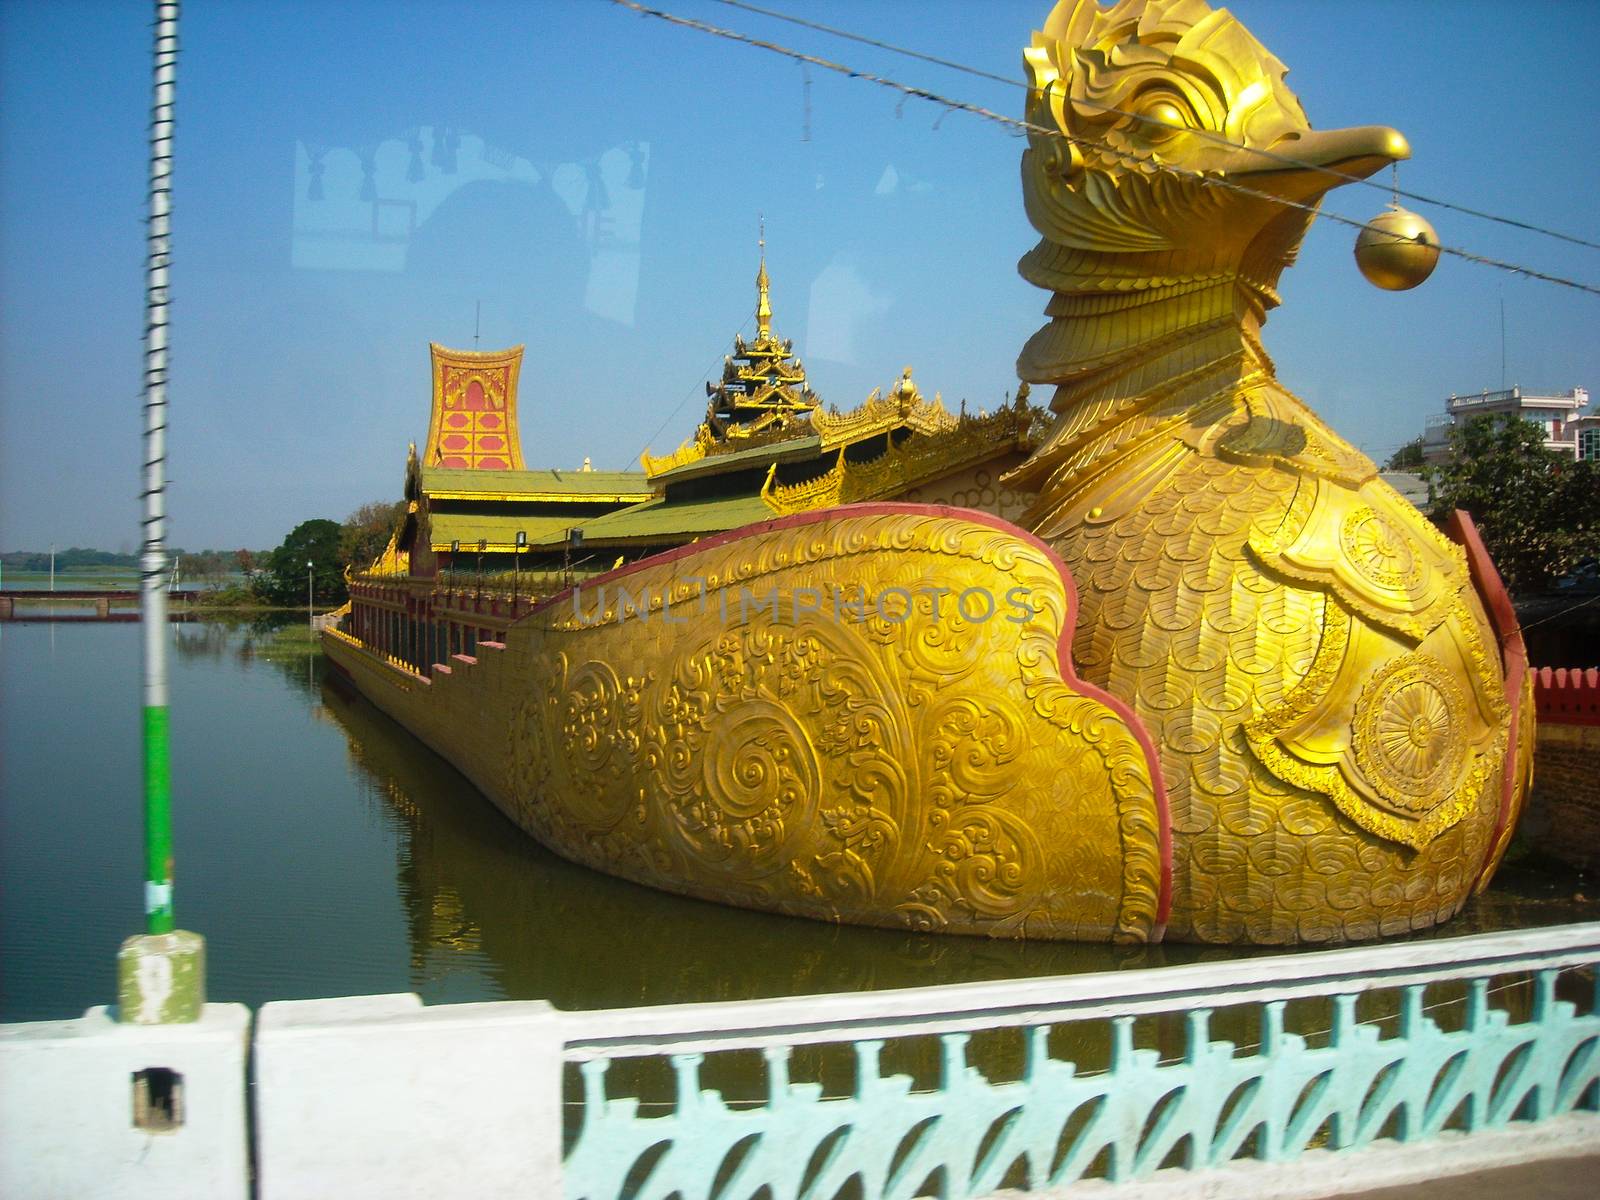 a golden boat in burma at sightseeing by Tevion25